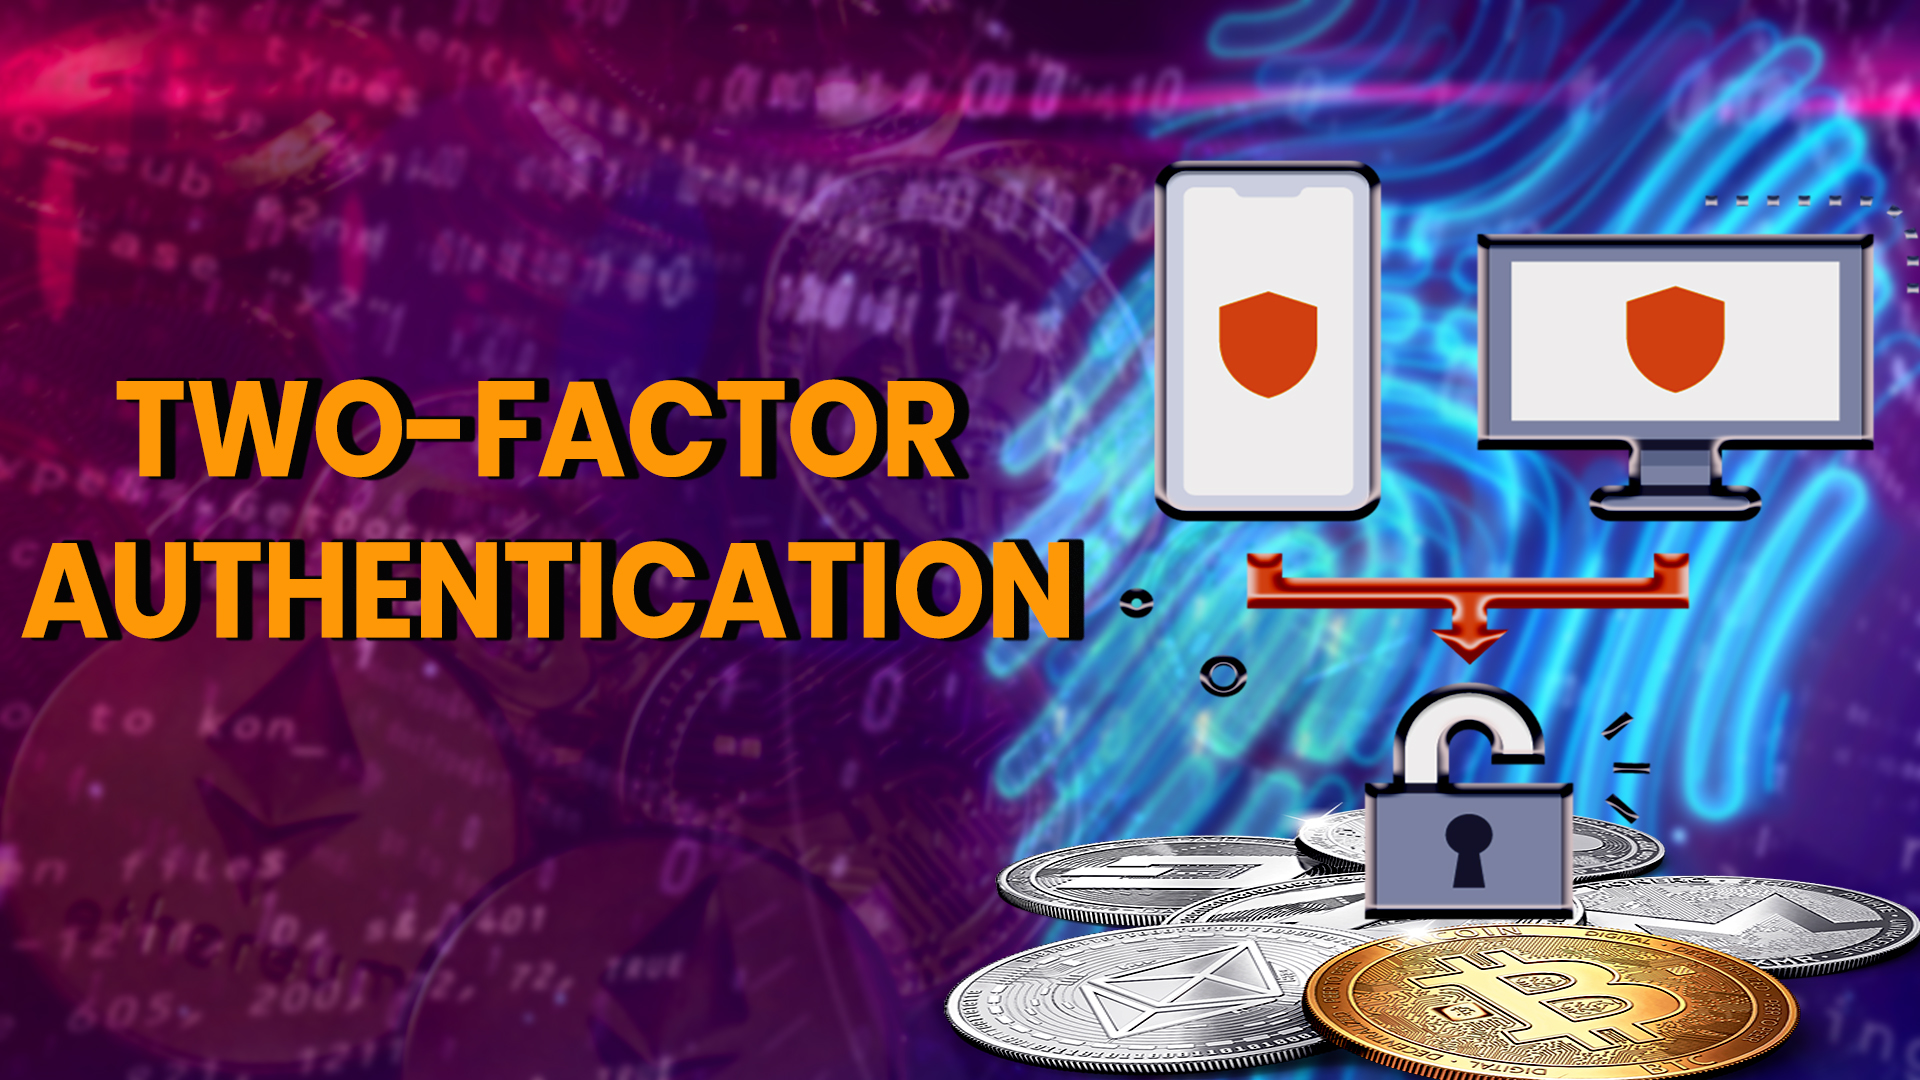 About Two-Factor Authentication And How To Use It In Crypto?